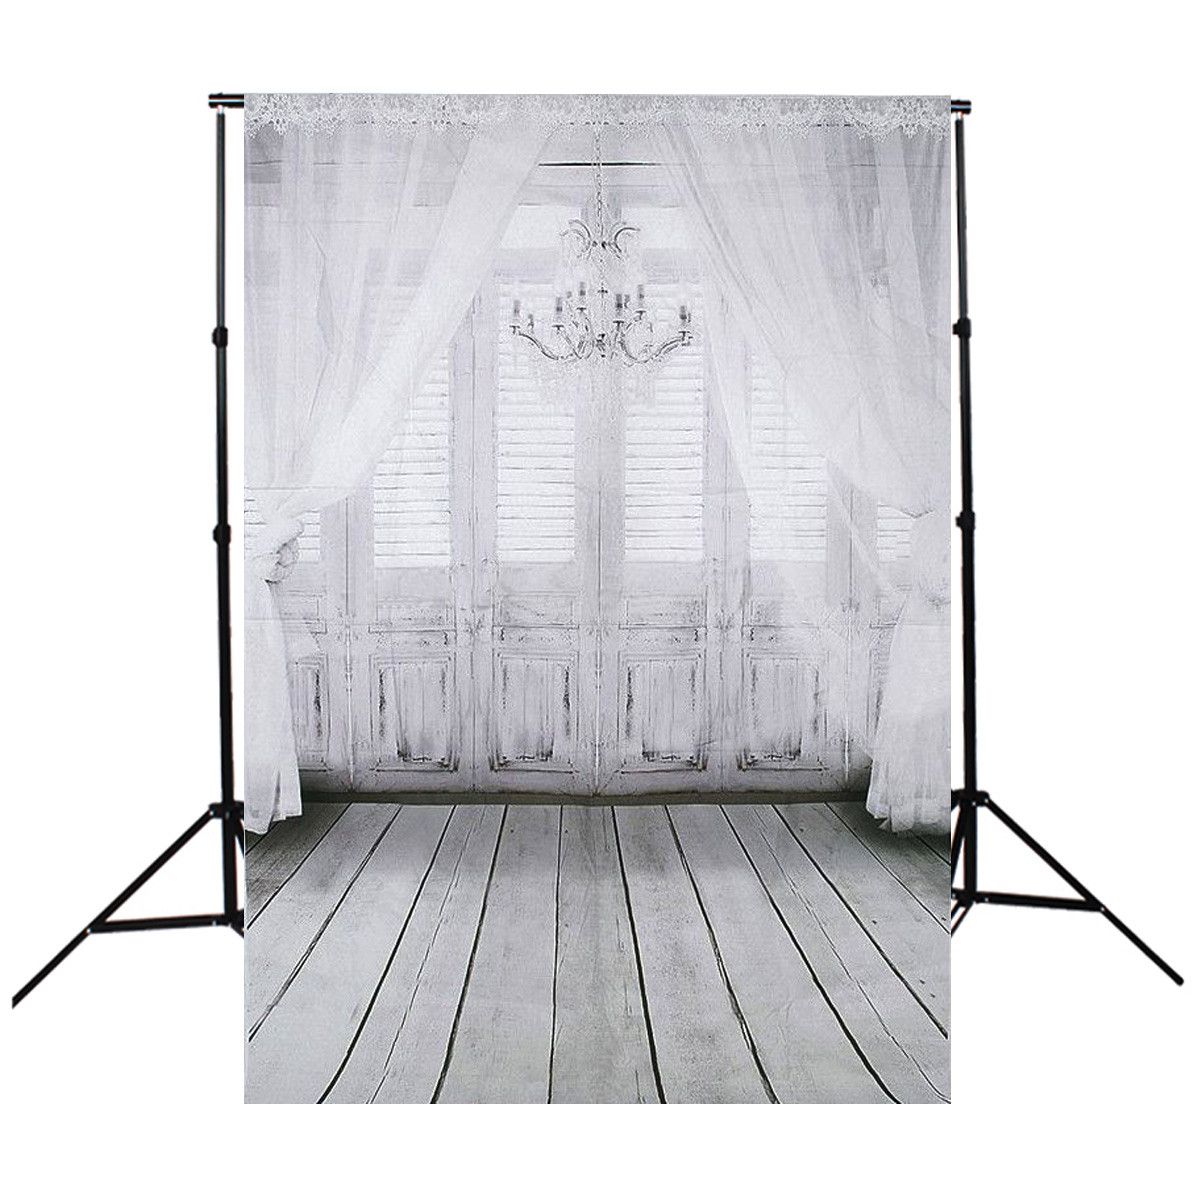 3x5FT-White-Wood-Wall-Window-Floor-Backdrop-Photography-Prop-Photo-Background-1681607